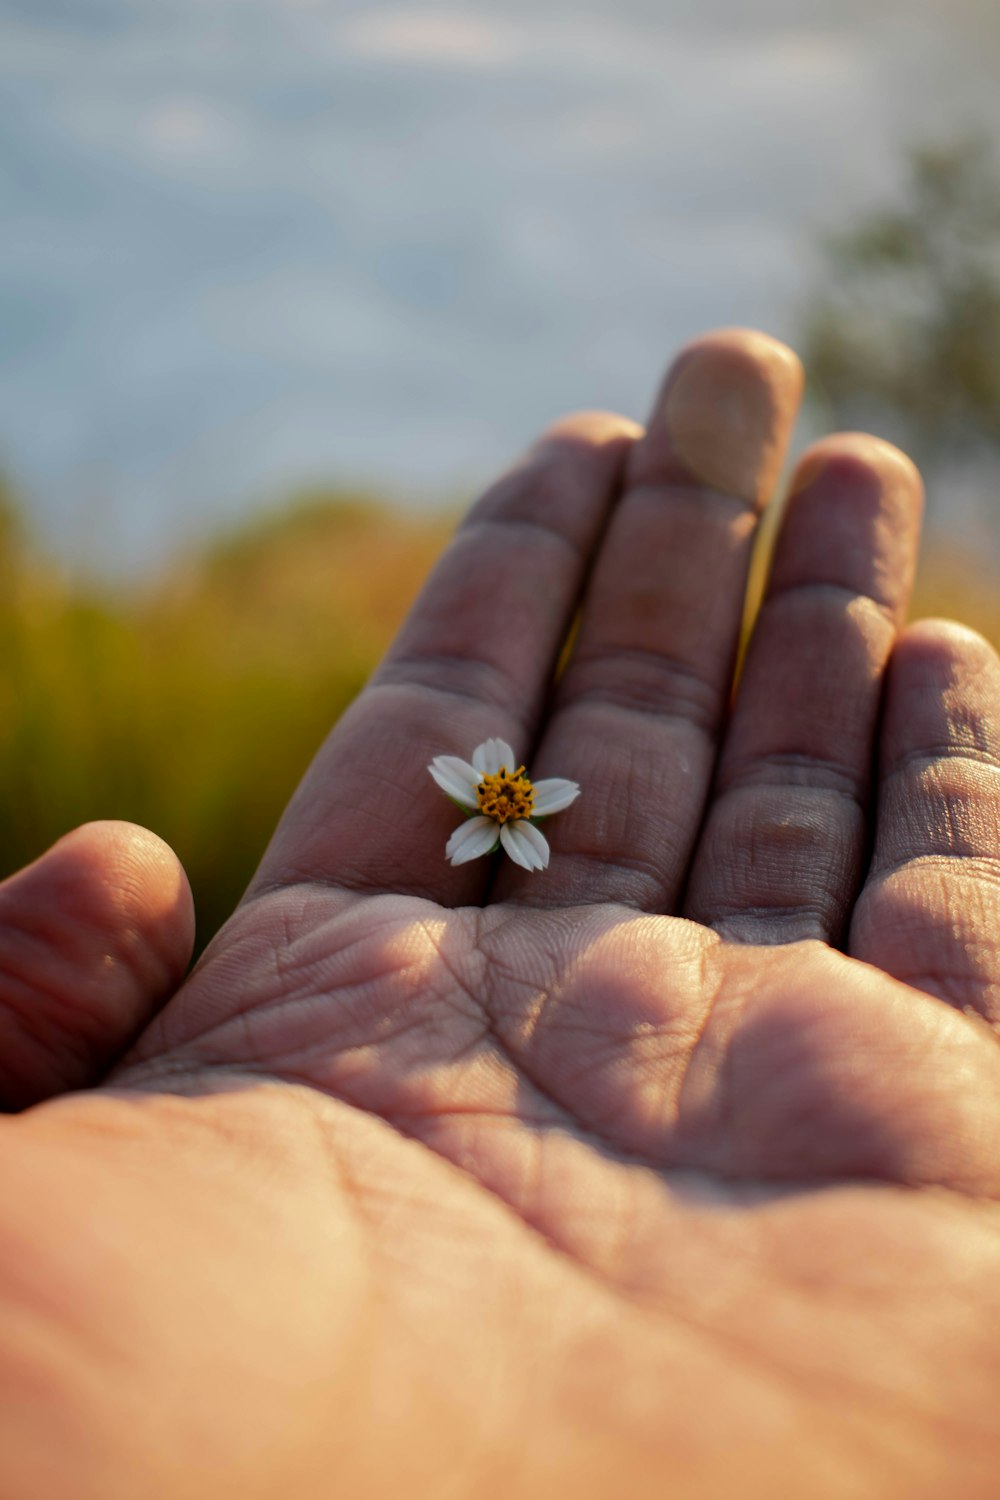 a person's hand holding a tiny white flower